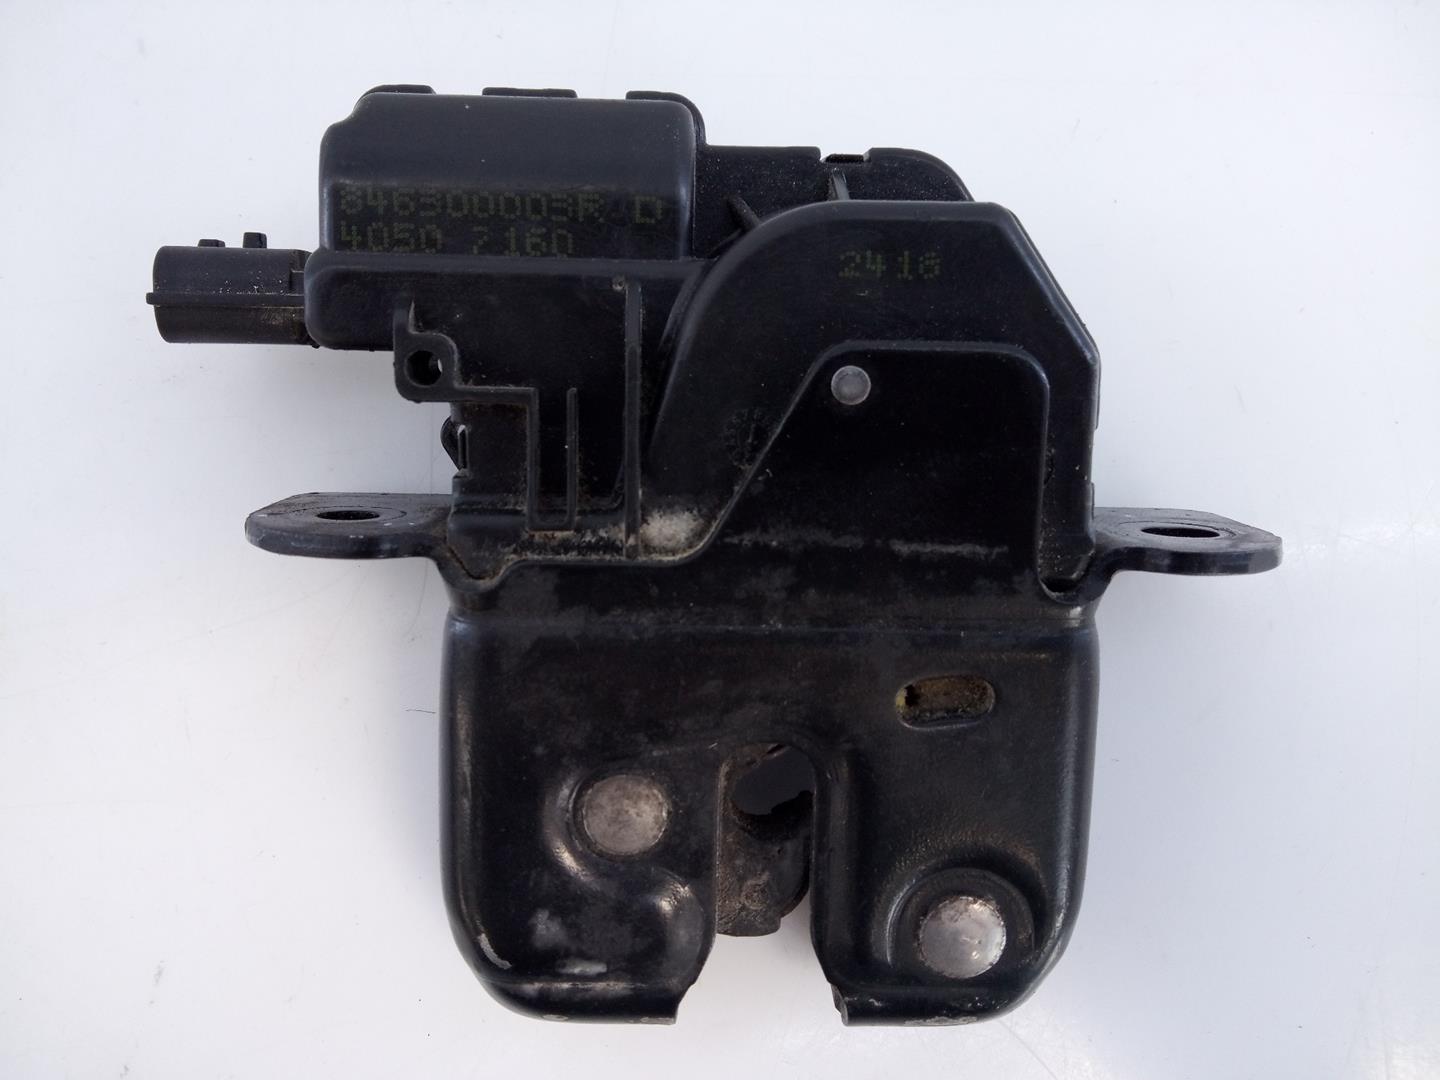 RENAULT Twingo 2 generation (2007-2014) Tailgate Boot Lock 846300003R, E1-A4-48-1 24453561